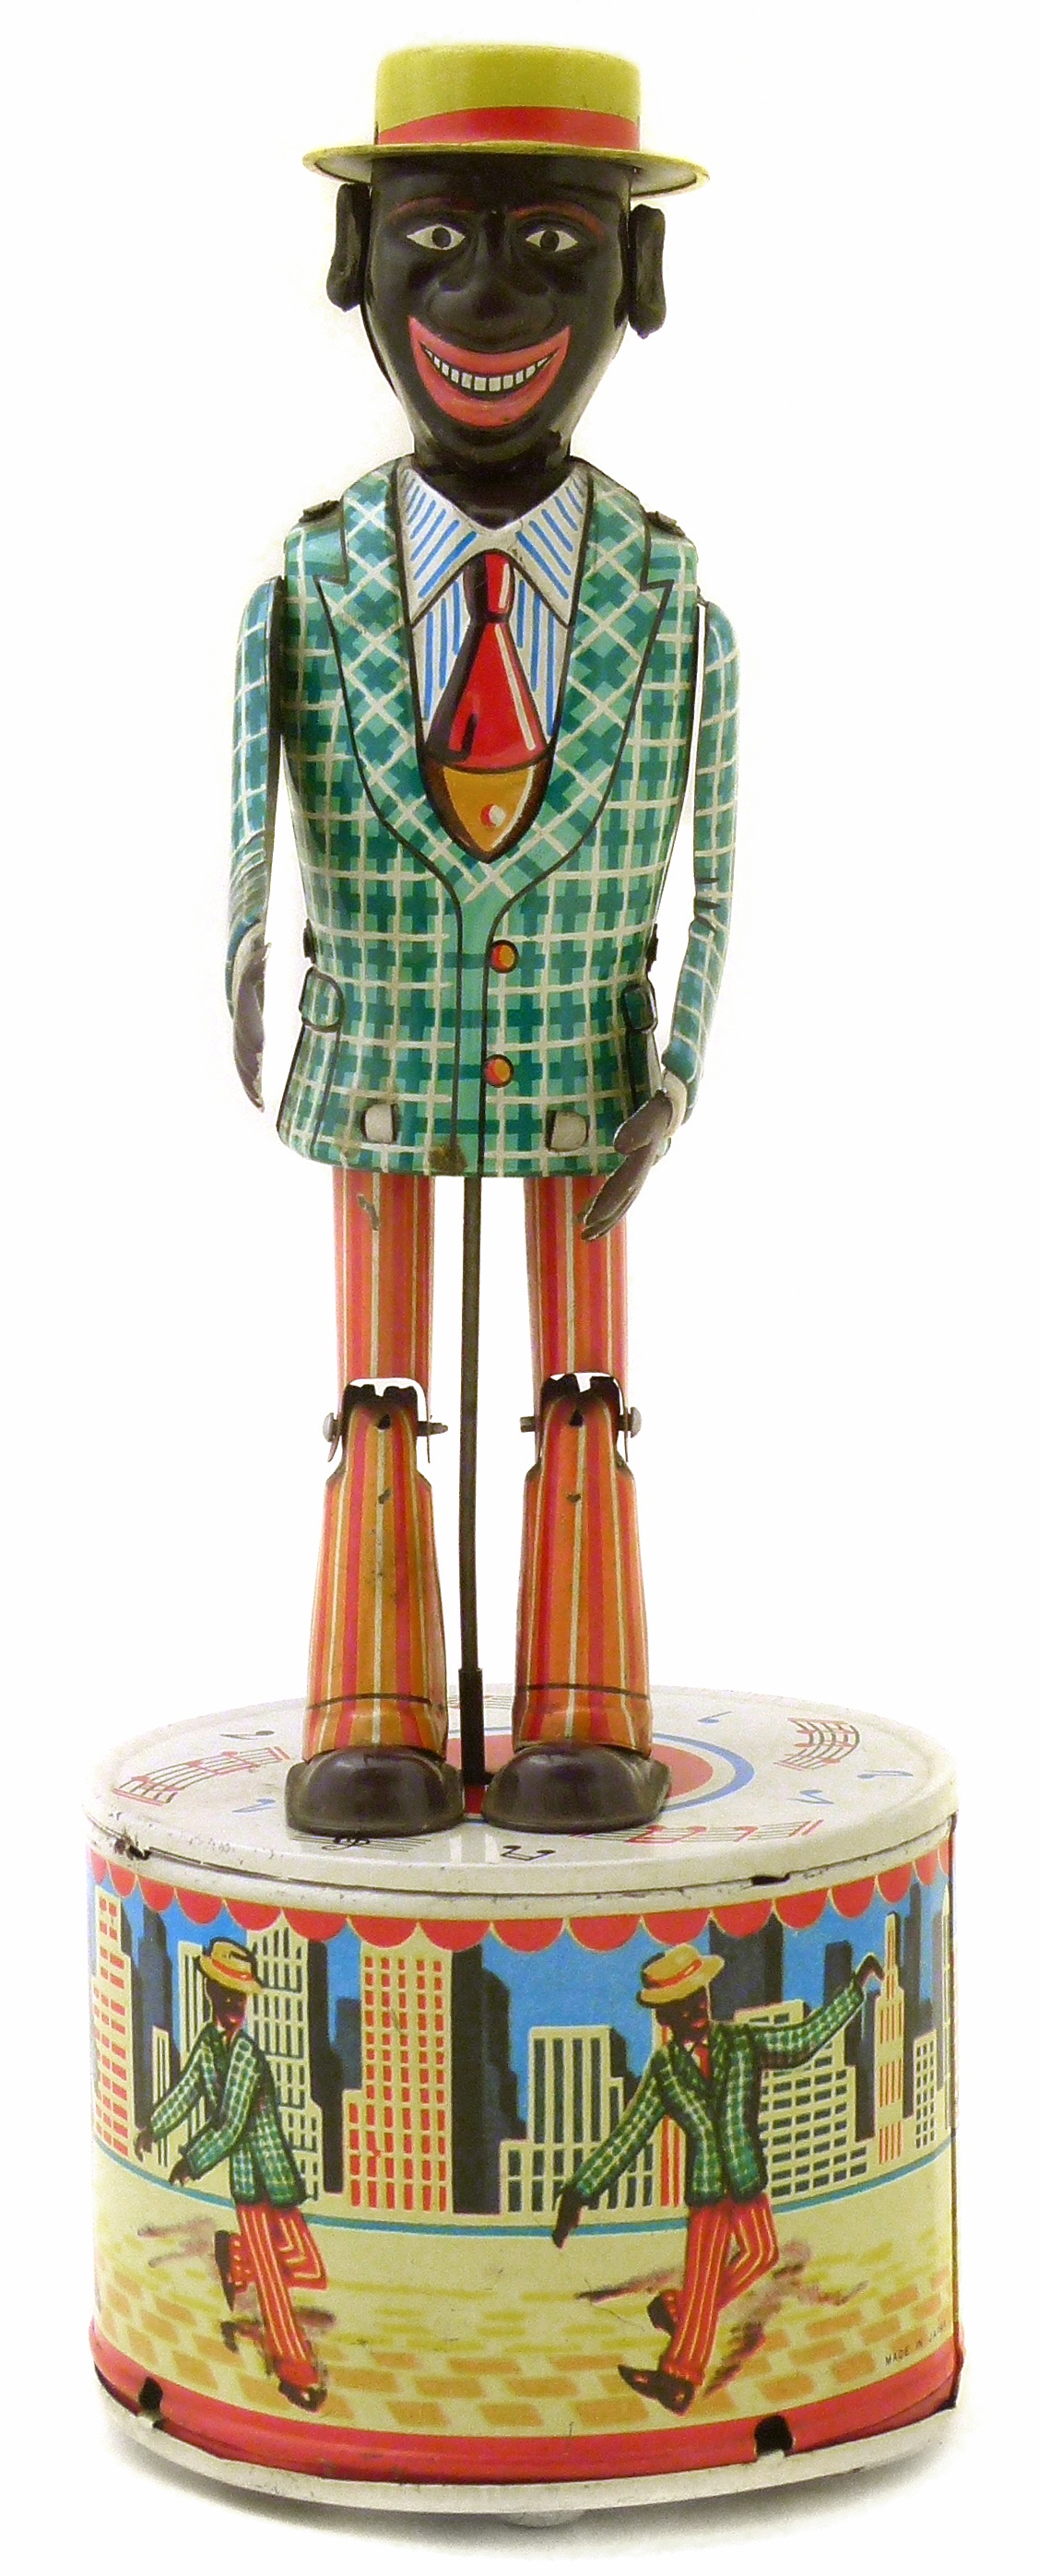 Japanese battery-operated dancing figure